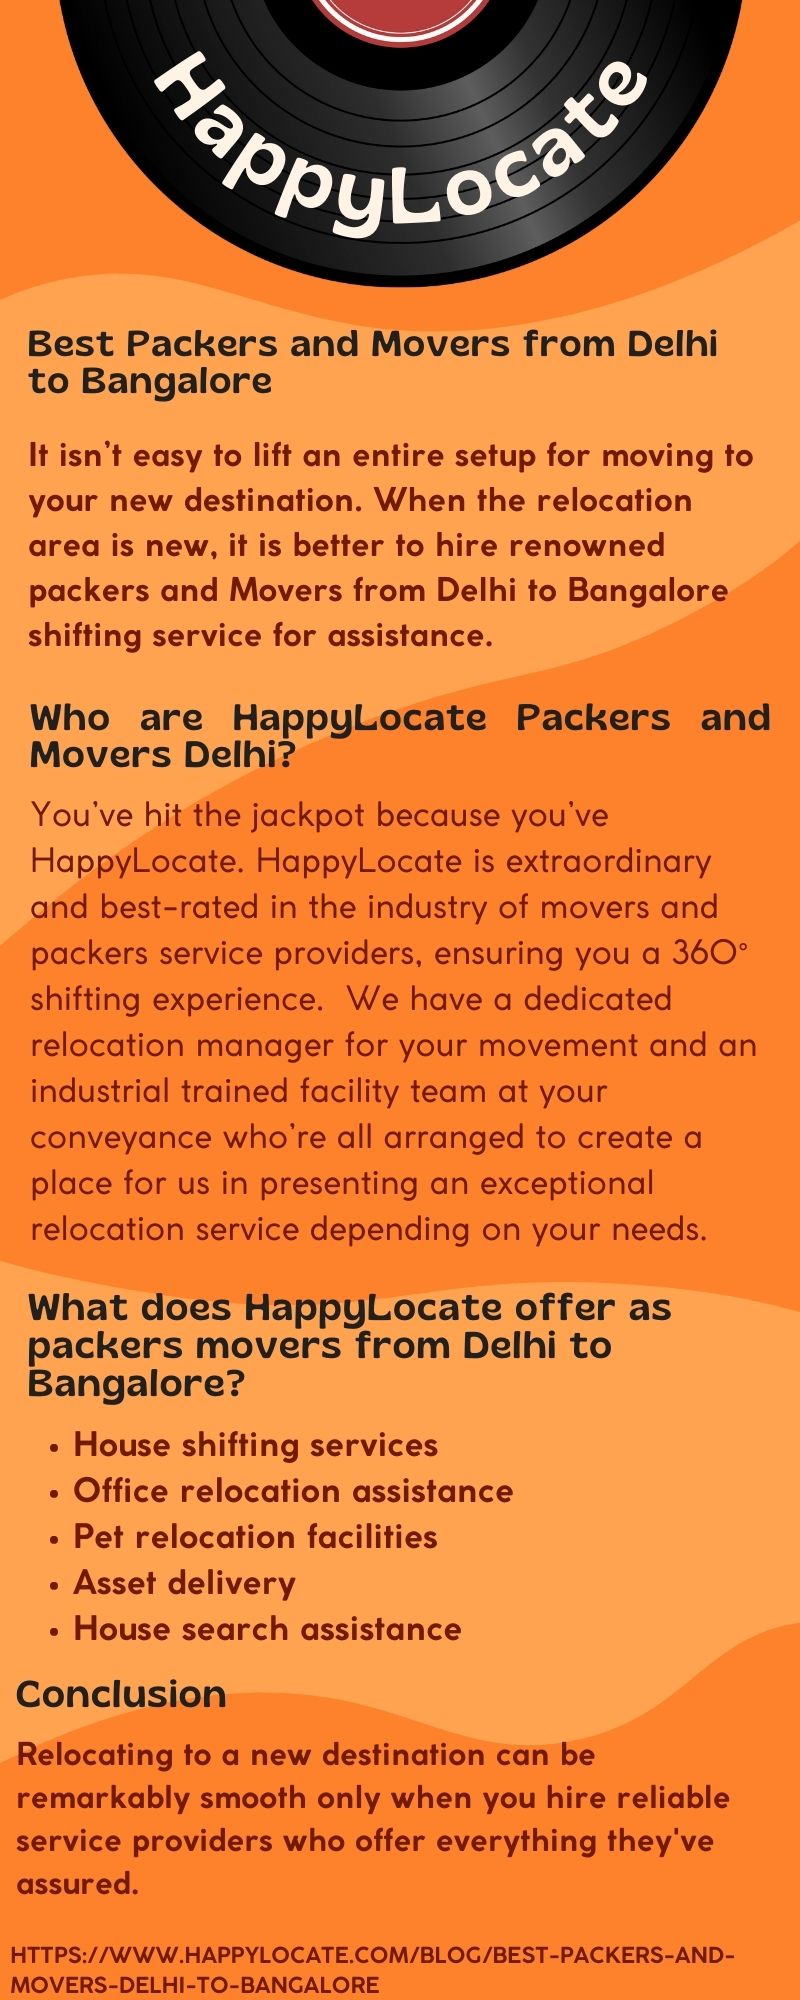 Best Packers and Movers from Delhi
to Bangalore

It isn’t easy to lift an entire setup for moving to
your new destination. When the relocation
area is new, it is better to hire renowned
packers and Movers from Delhi to Bangalore
shifting service for assistance.

Who are HappylLocate Packers and
Movers Delhi?

You've hit the jackpot because you've
HappyLocate. HappylLocate is extraordinary
and best-rated in the industry of movers and
packers service providers, ensuring you a 360°
shifting experience. We have a dedicated
relocation manager for your movement and an
industrial trained facility team at your
conveyance who're all arranged to create a
place for us in presenting an exceptional
relocation service depending on your needs.

What does HappyLocate offer as
packers movers from Delhi to
Bangalore?

» House shifting services

« Office relocation assistance
« Pet relocation facilities

+ Asset delivery

« House search assistance

Conclusion

Relocating to a new destination can be
remarkably smooth only when you hire reliable
service providers who offer everything they've
assured.

HTTPS://WWW HAPPYLOCATE.COM/BLOG/BEST-PACKERS-AND-
MOVERS-DELHI-TO-BANCALORE